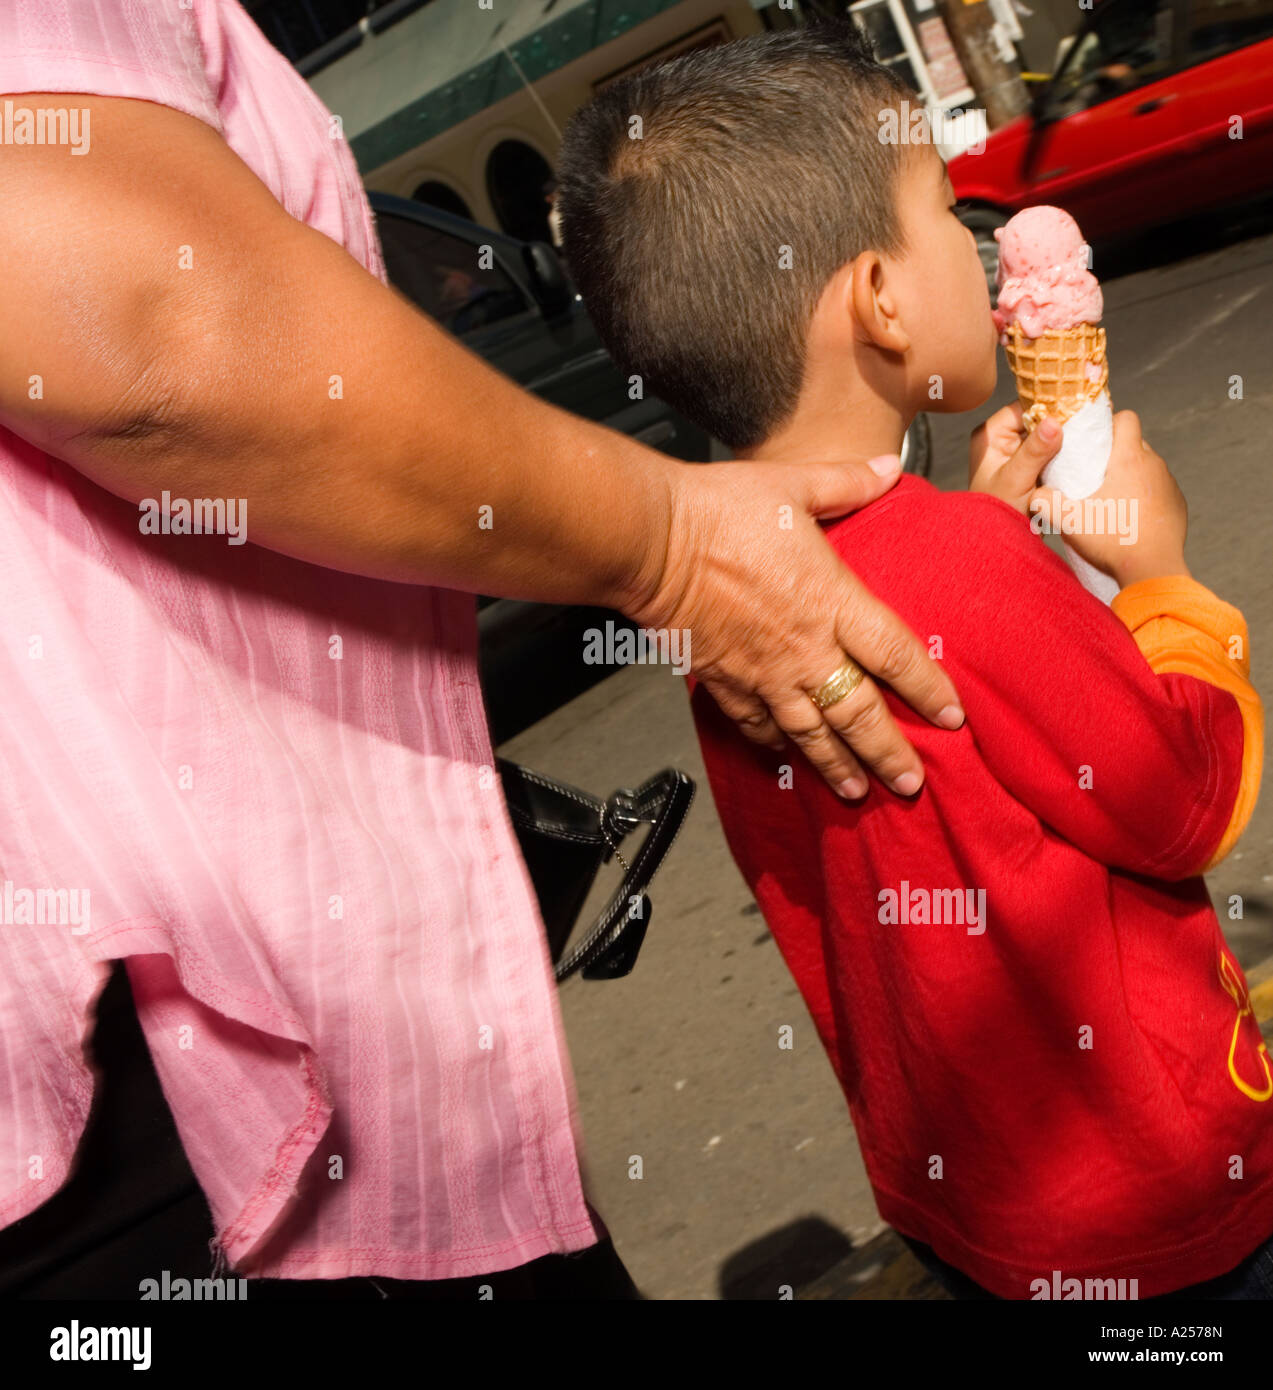 Boy eating ice-cream mexico No release required as crop, back side view means all features unrecognizable Stock Photo